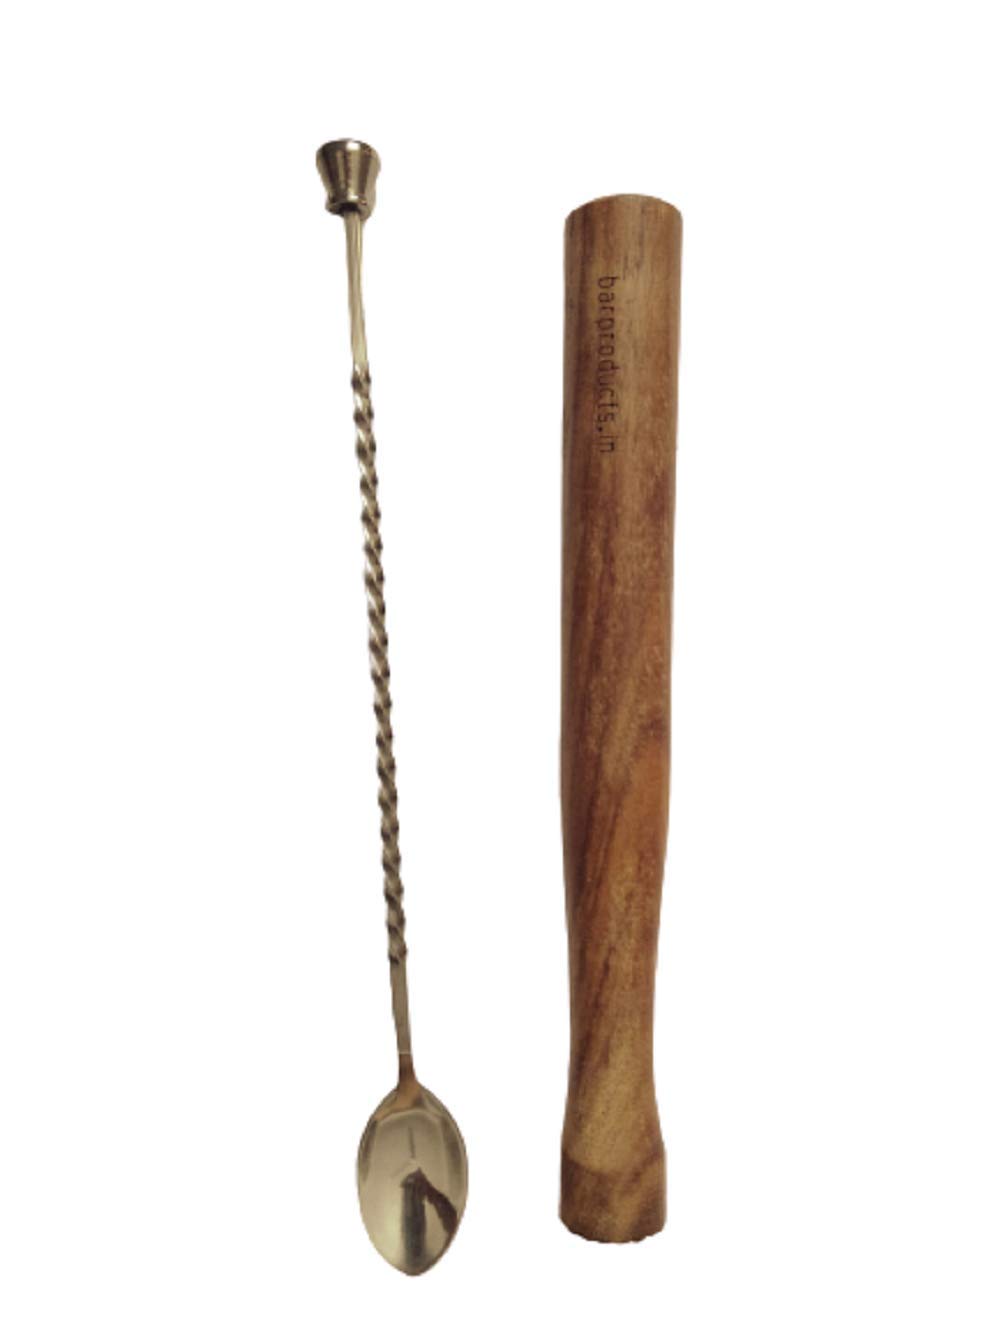 NJ Premium Bar Stirrer Spoon Twisted with Muddler top,Wooden Mojito Muddler, Durable Cocktail Muddler 10 Inches,Long Spoon, Cocktail Mixing Spoon, Long Handle Stirring Spoon, Bar Spoon 11" Length